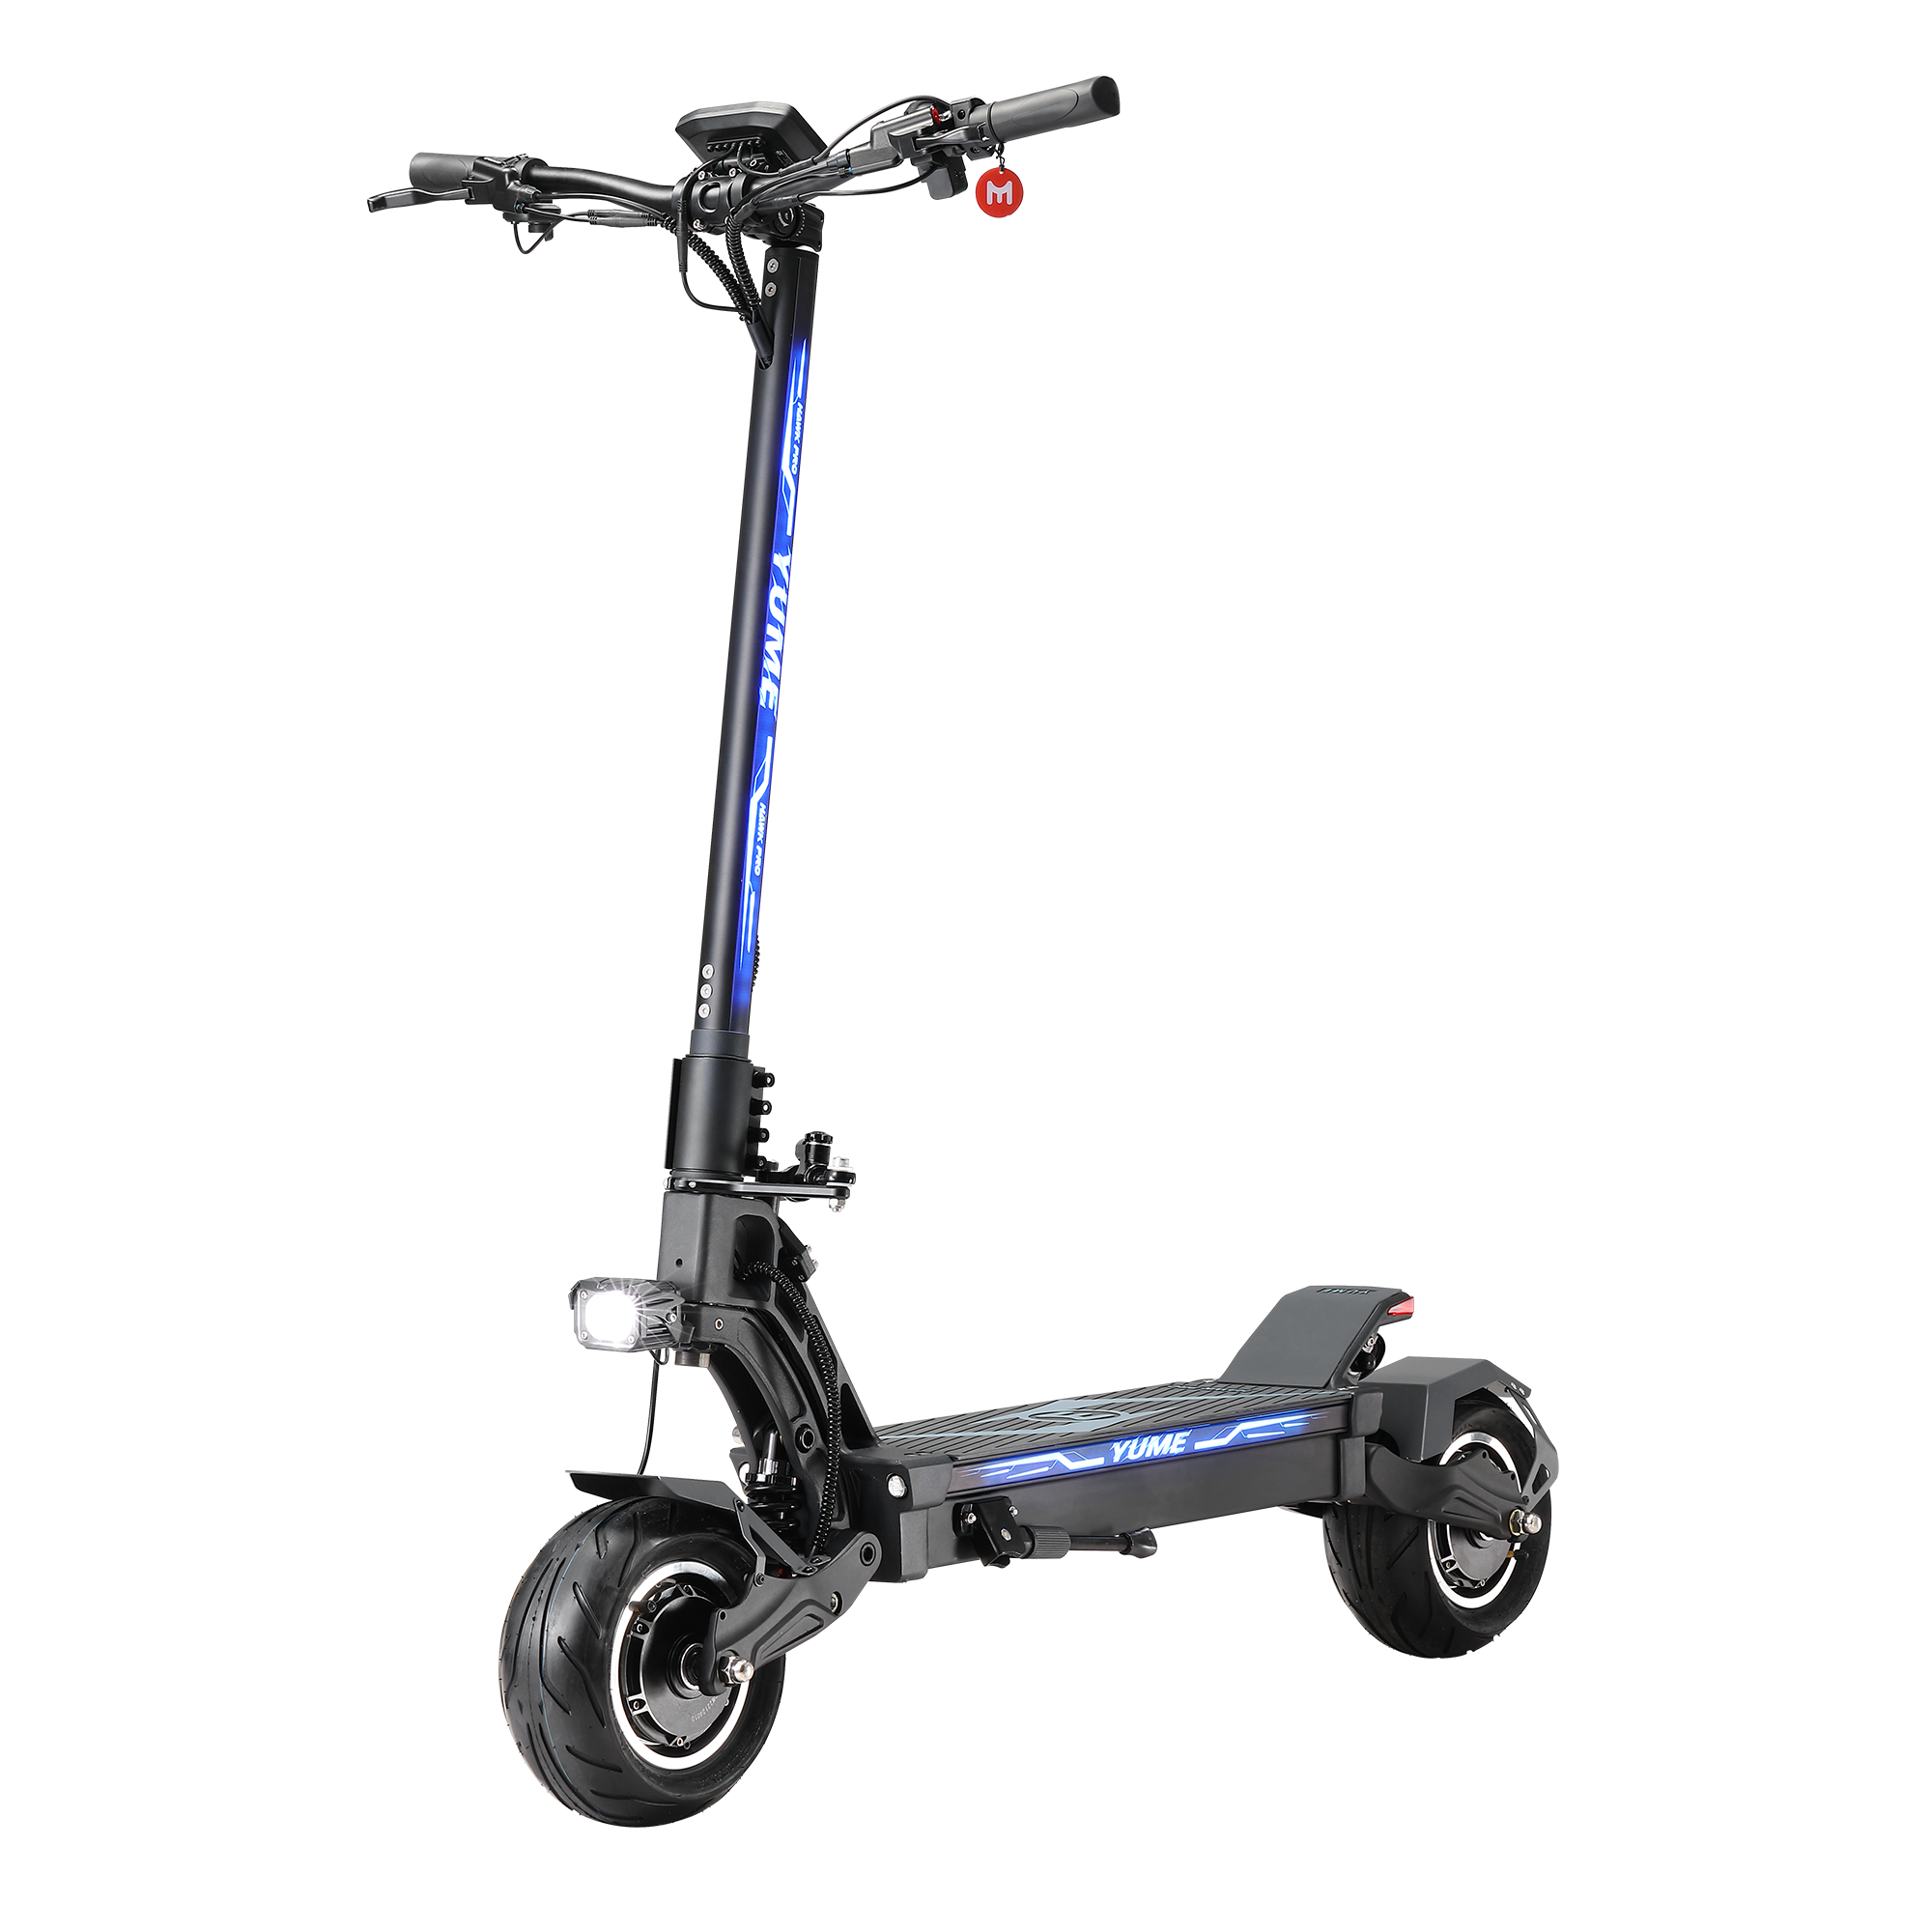 best price,yume,hawk,pro,electric,scooter,60v,30ah,3000wx2,10inch,eu,discount